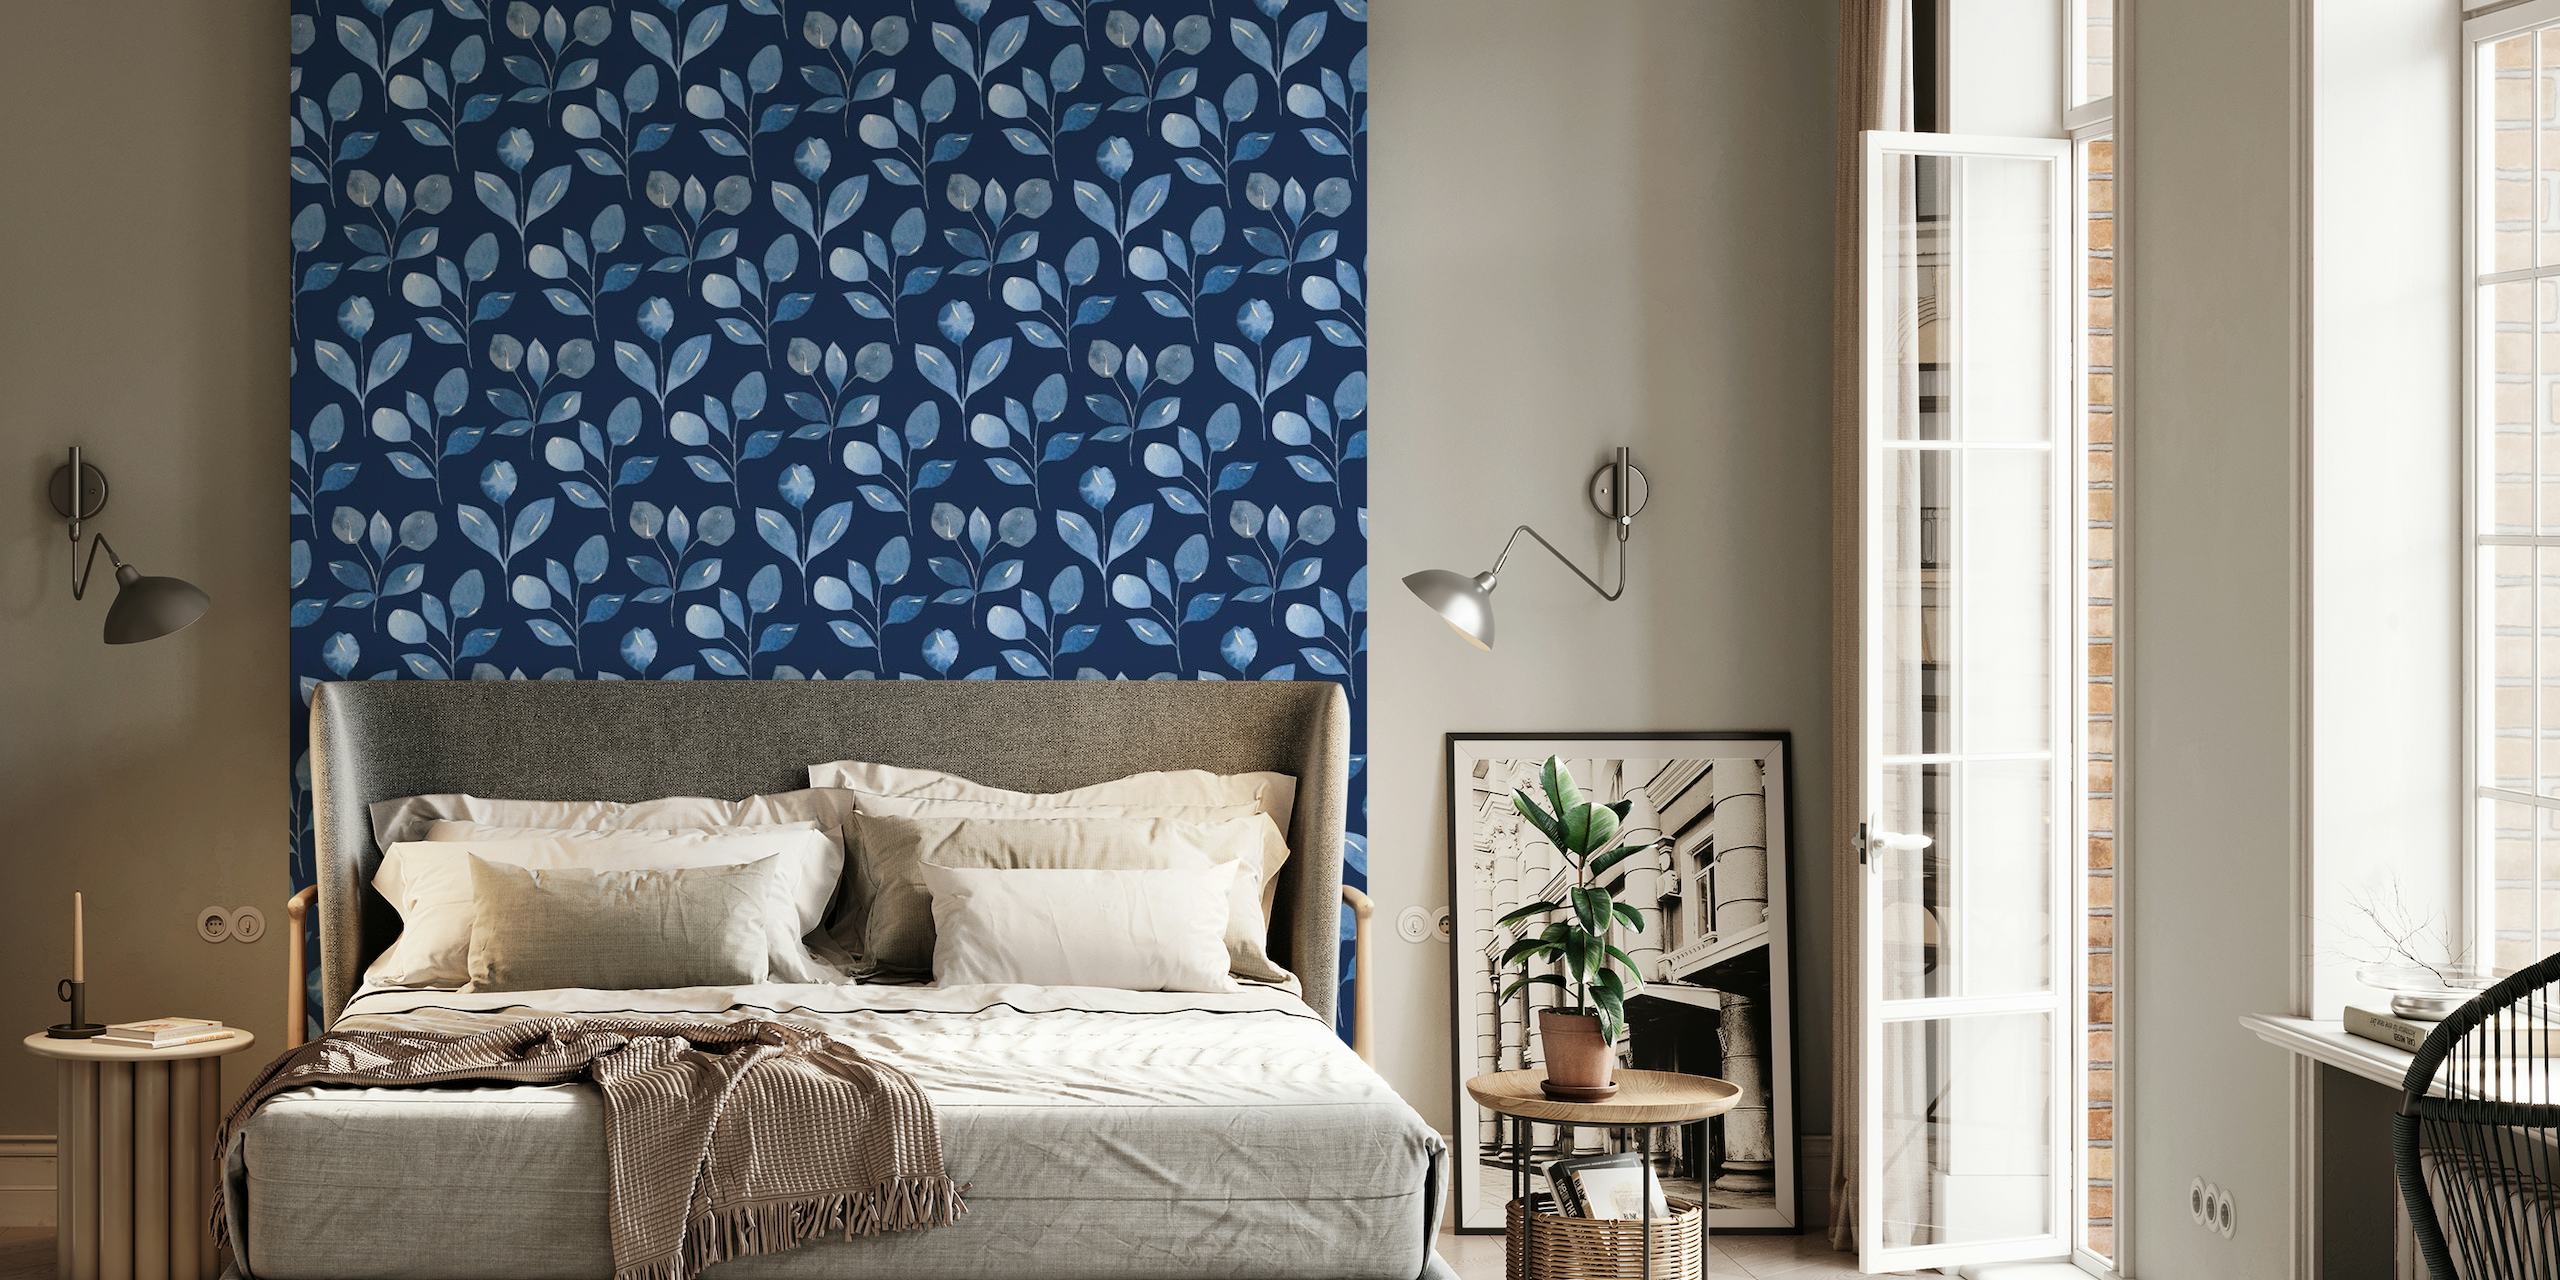 A serene indigo-colored wall mural with a pattern of stylized botanical buds for interior decoration.